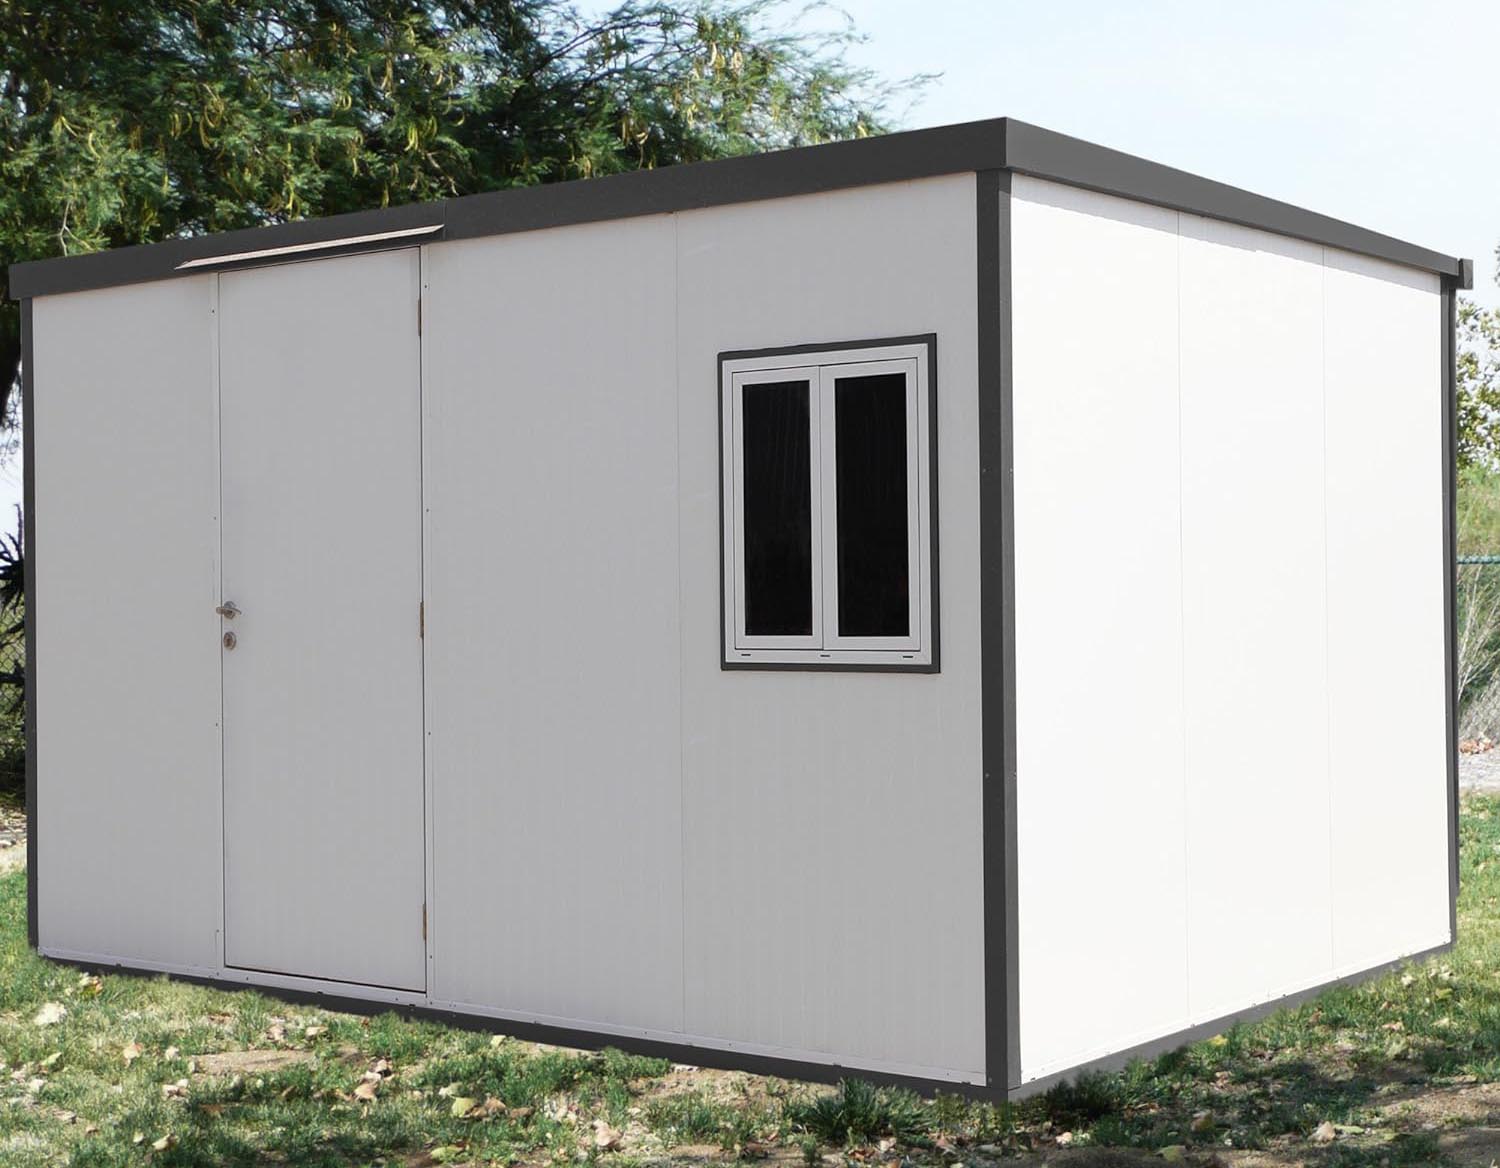 Kit Homes You Can Actually Buy on Amazon Option Duramax 30432 Flat Roof Insulated Building